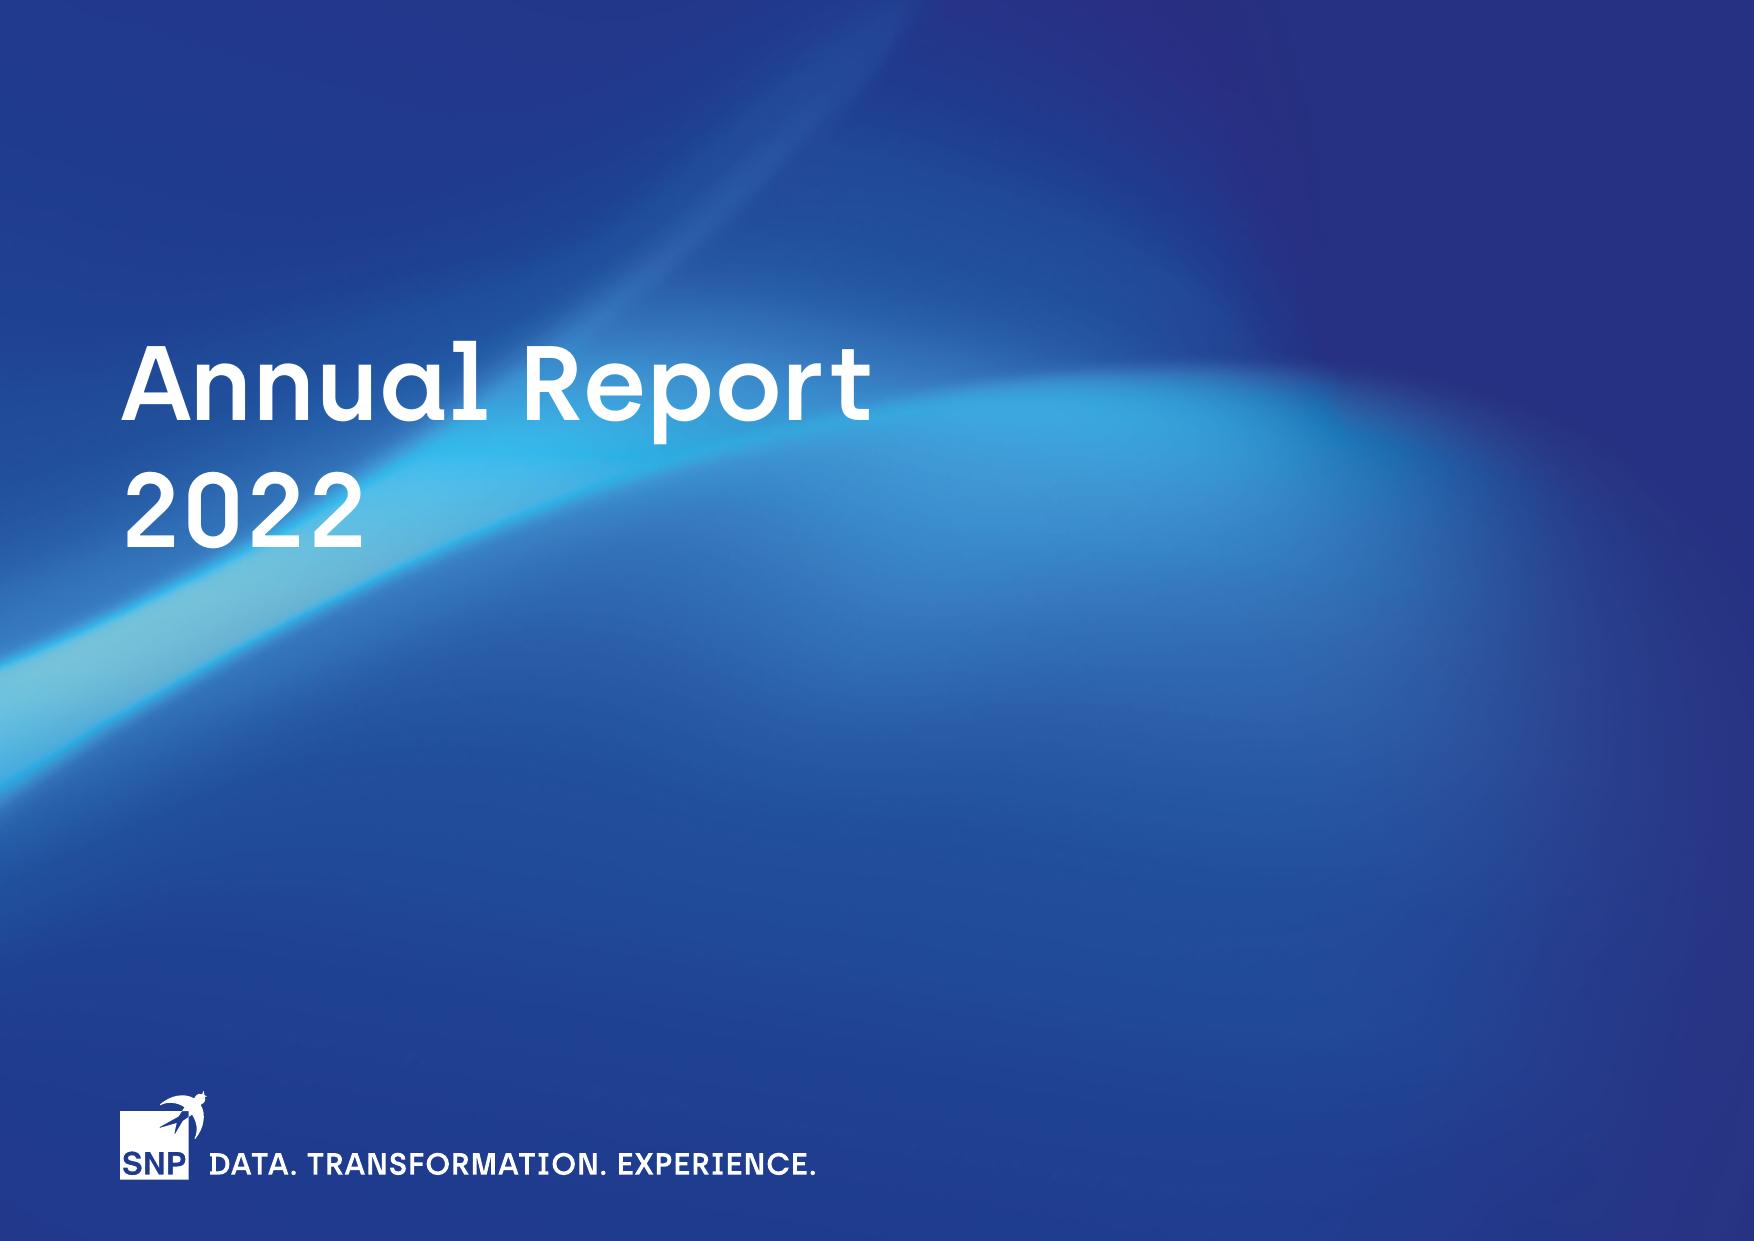 SNPGROUP 2022 Annual Report